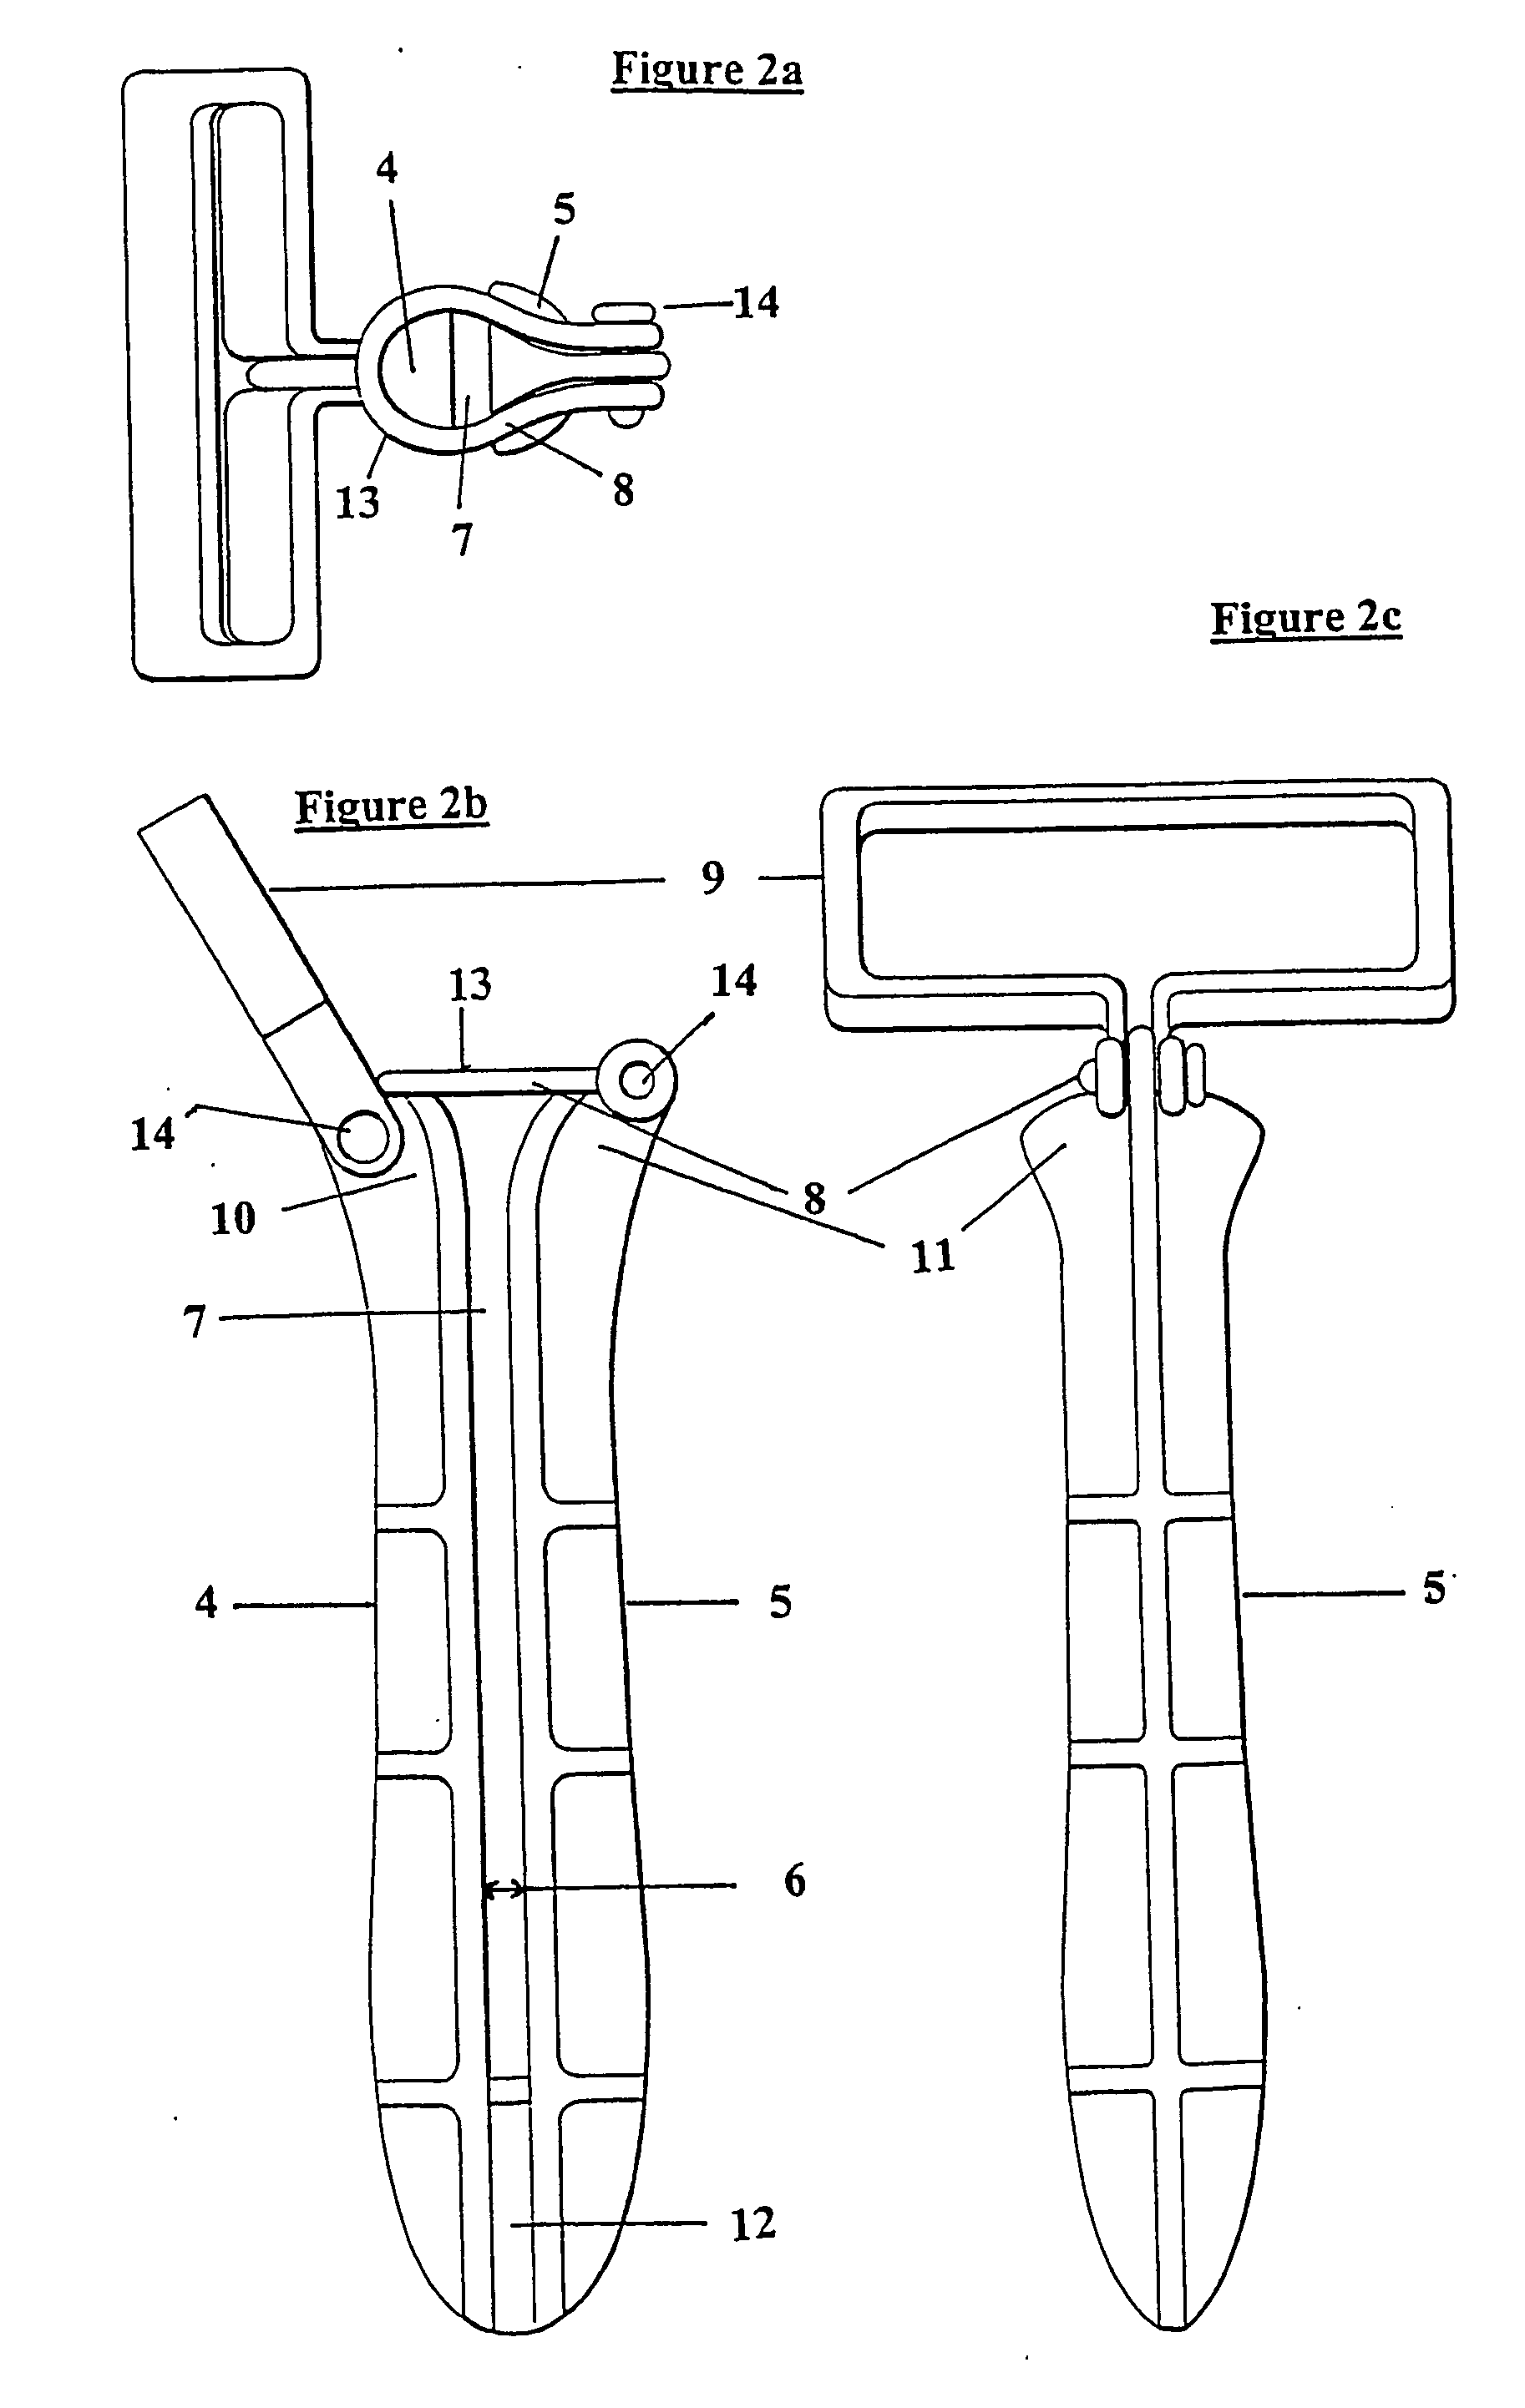 Adjustable lead cord rope or sheet storage device